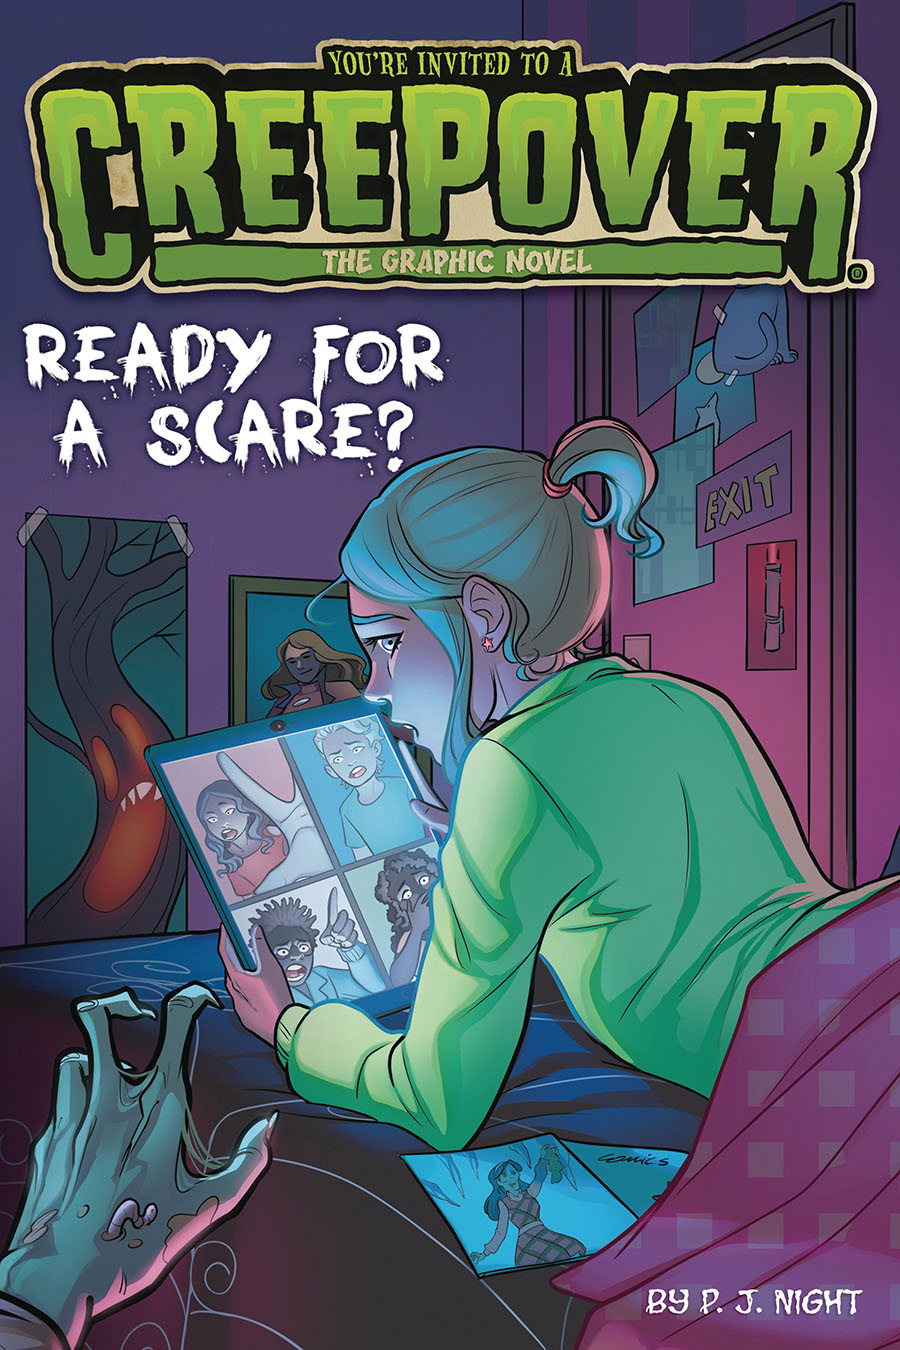 Youre Invited To A Creepover The Graphic Novel Vol 3 Ready For A Scare TP